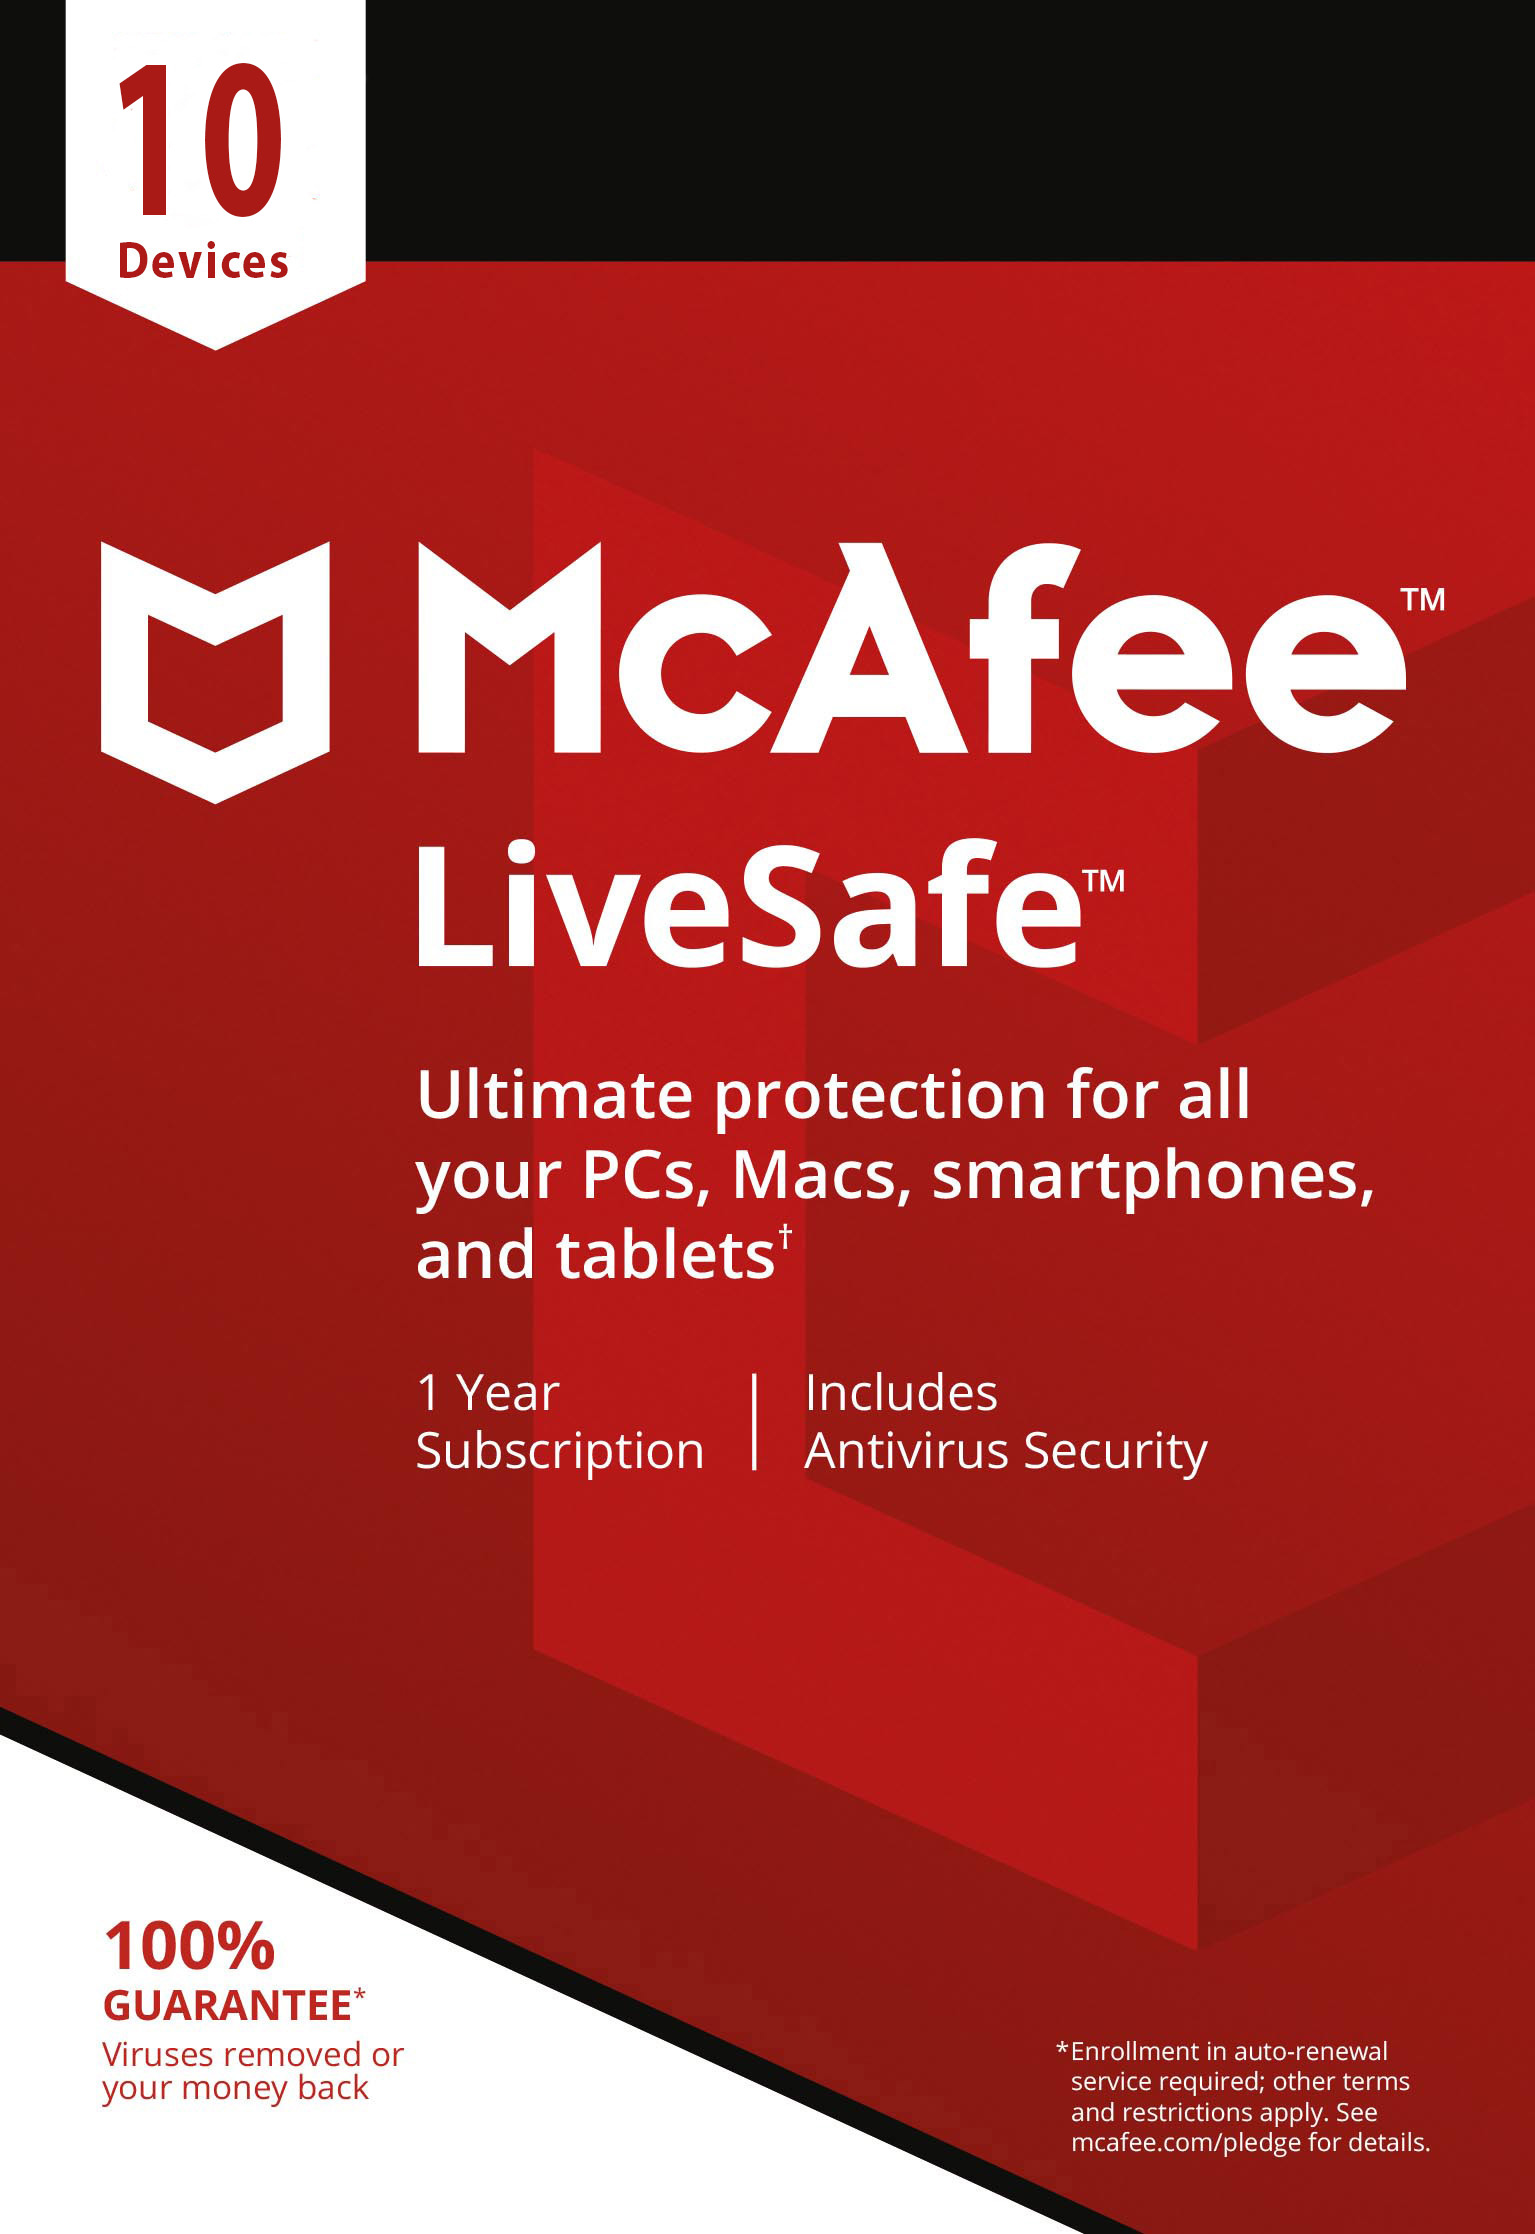 mcafee live safe 10 devices 1 year revised main image